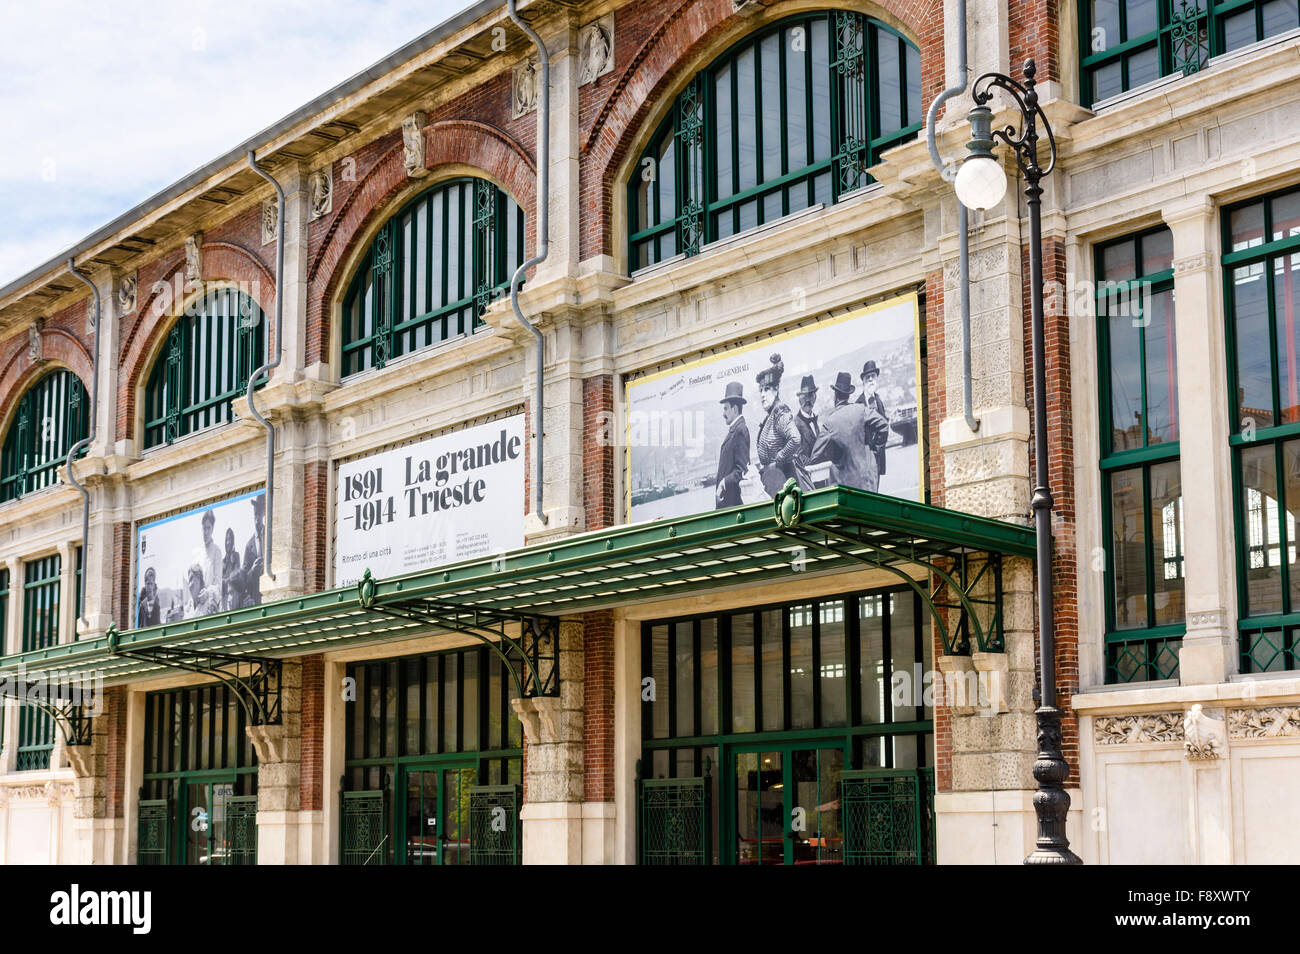 The facade of the old Fish Market building, now the Salone degli Incanti, Trieste, Italy Stock Photo